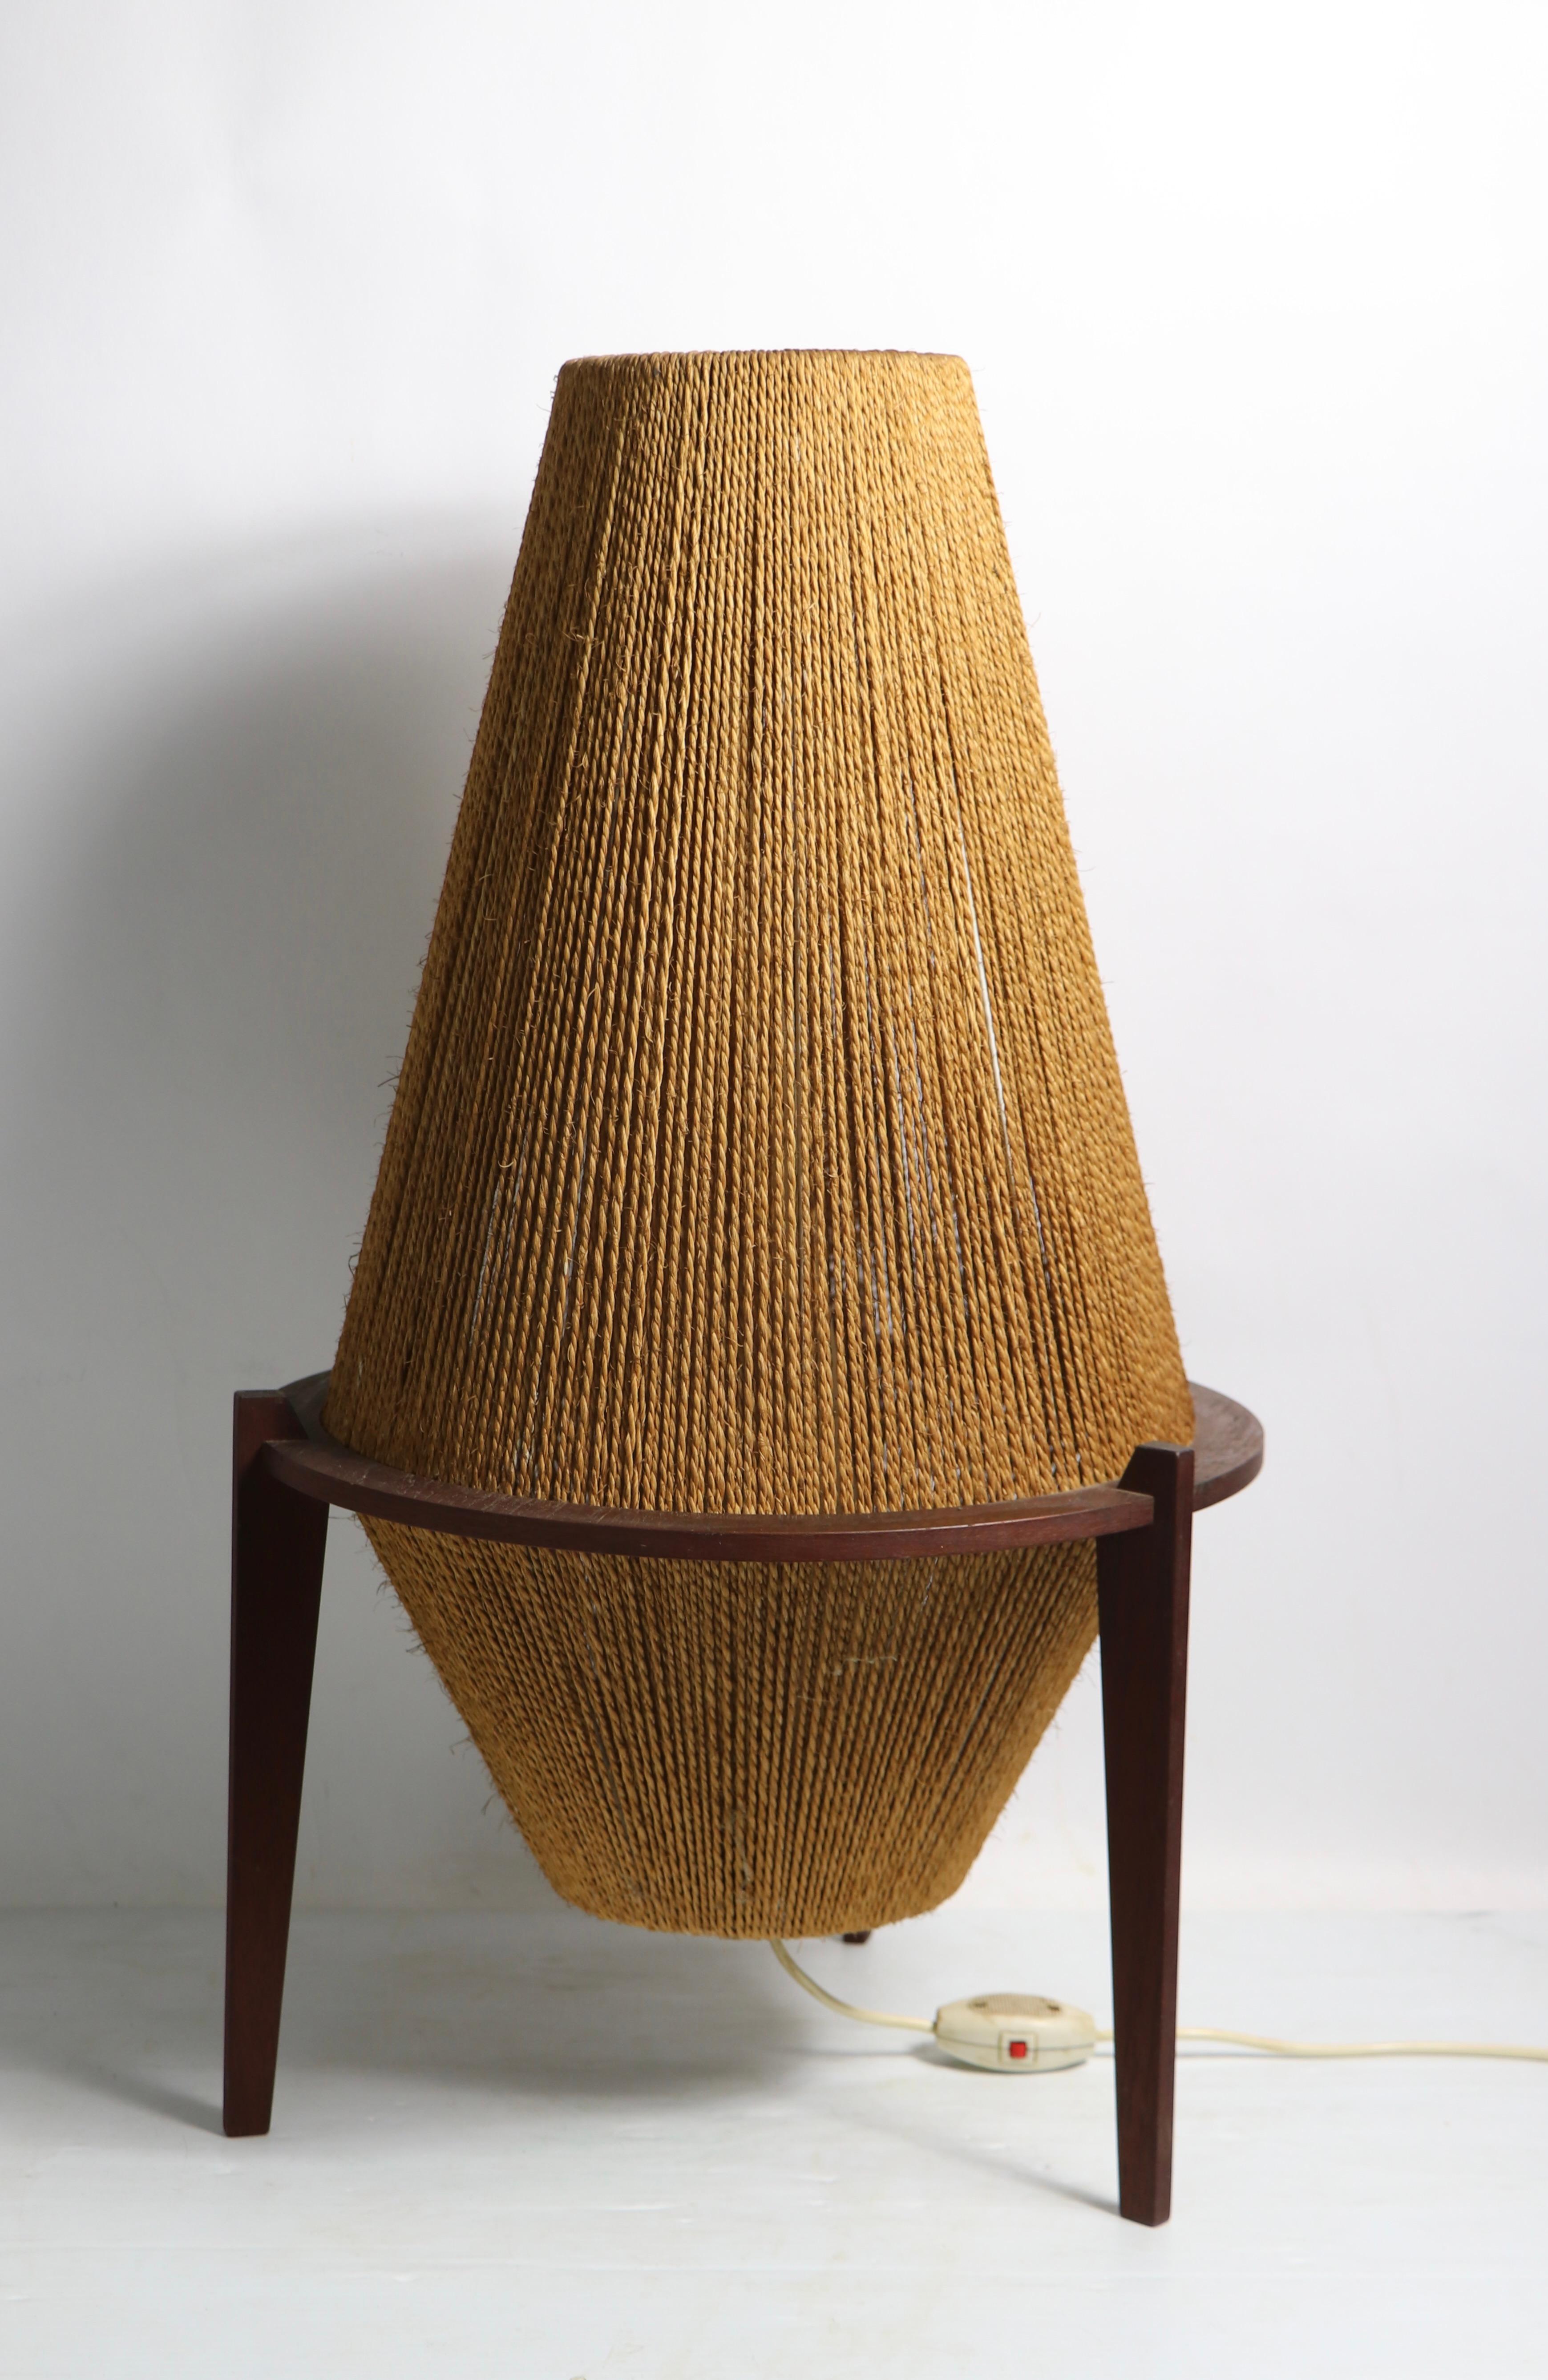 Hard to find example of Fog & Morup design, for IB Fabiasen - this chic architectural table lamp features a string ( jute ) exterior with a a solid teak base structure. The lamp is in excellent original, clean and working condition.